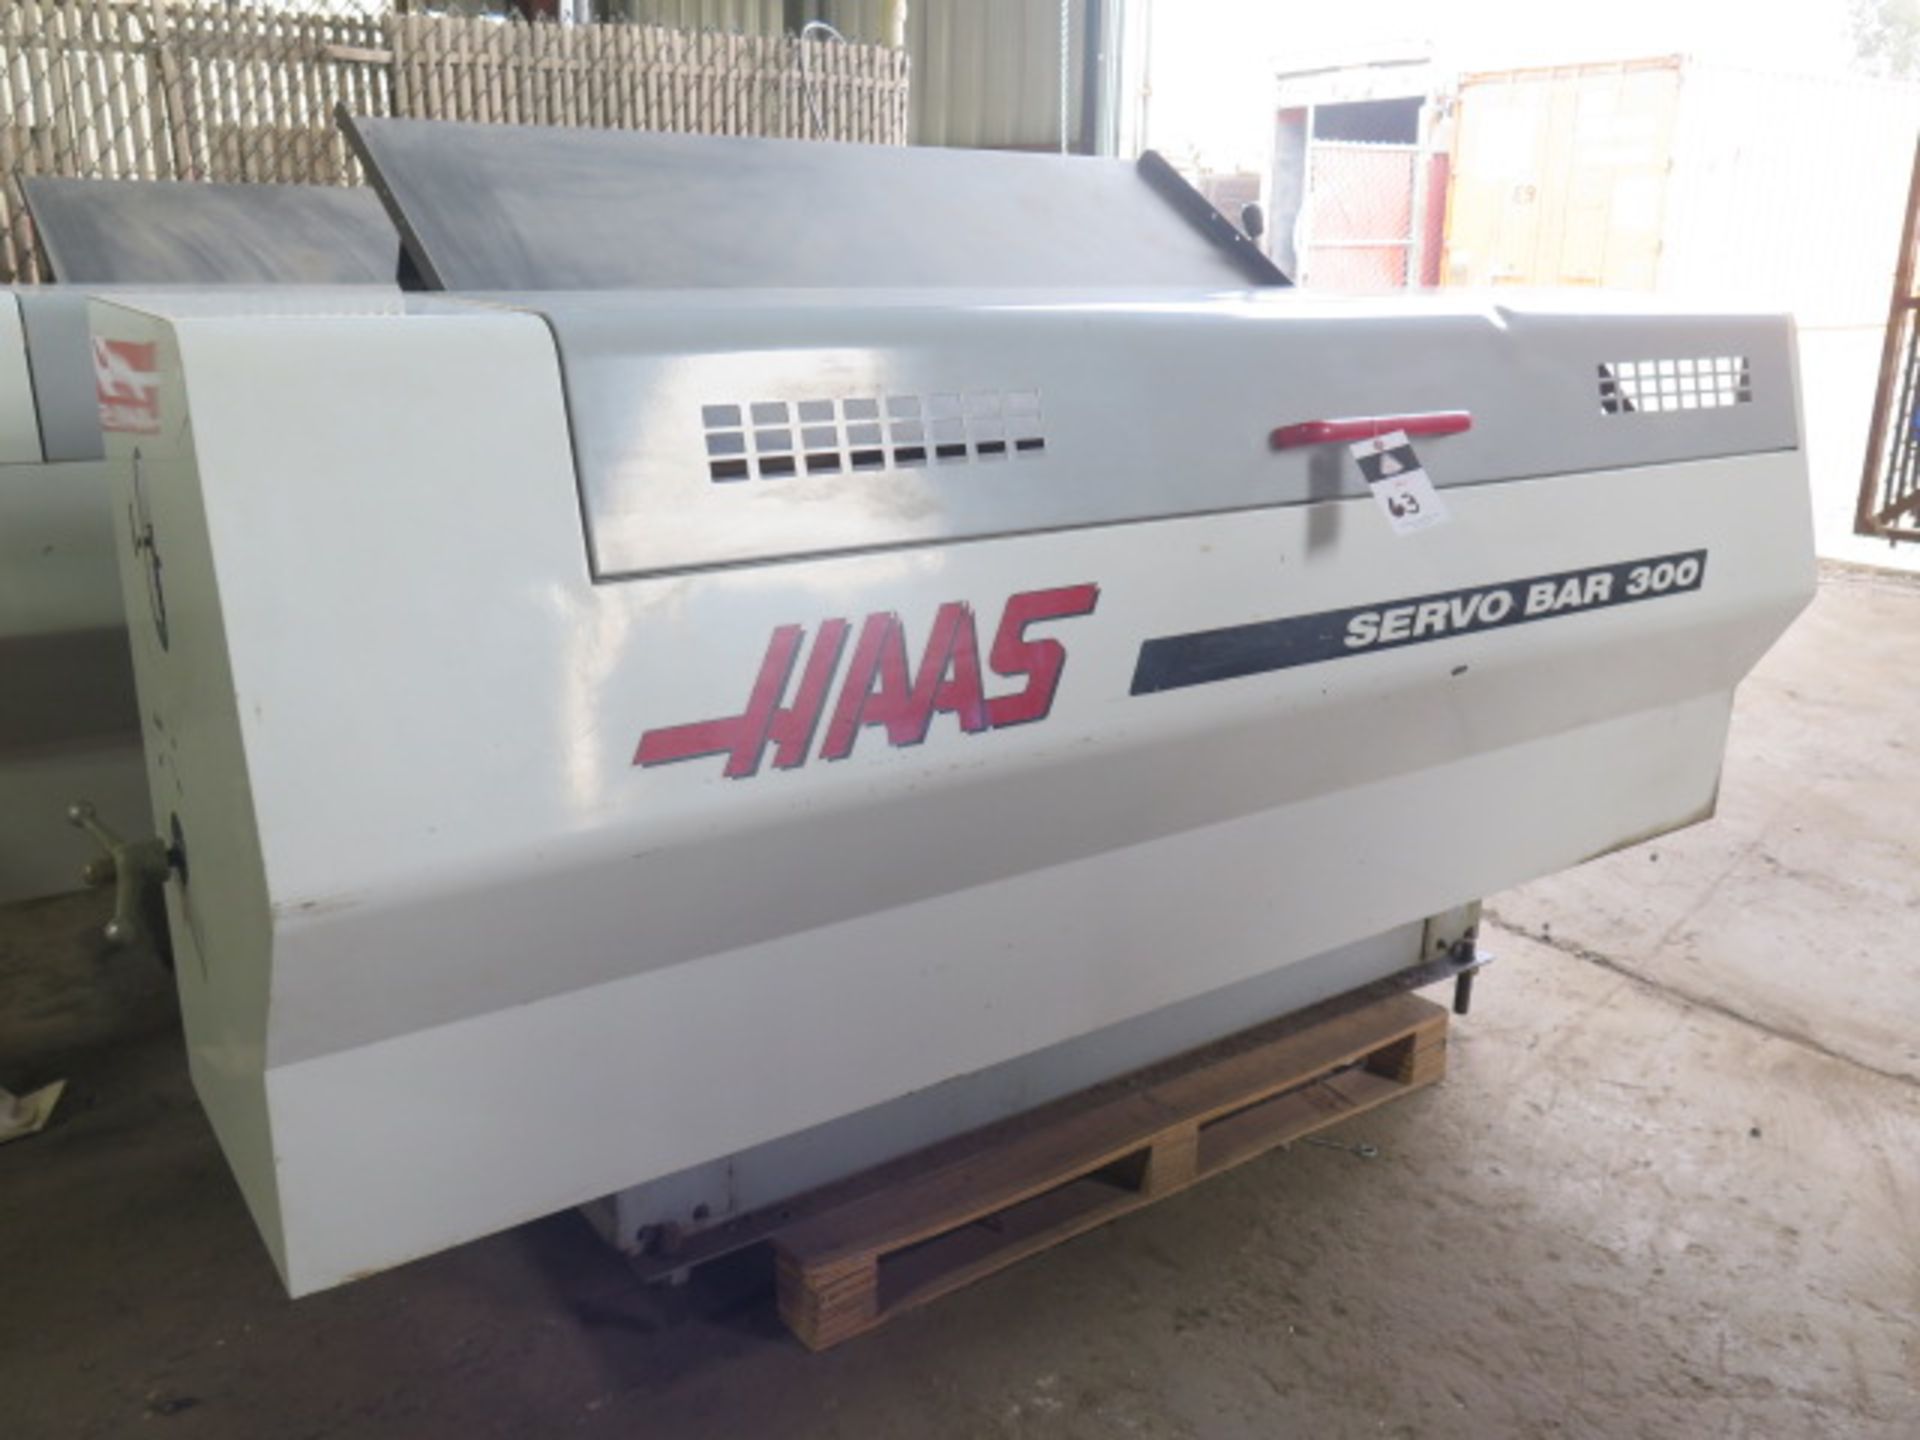 Haas ServoBar 300 Automatic Bar Loader / Feeder (SOLD AS-IS - NO WARRANTY) - Image 2 of 8